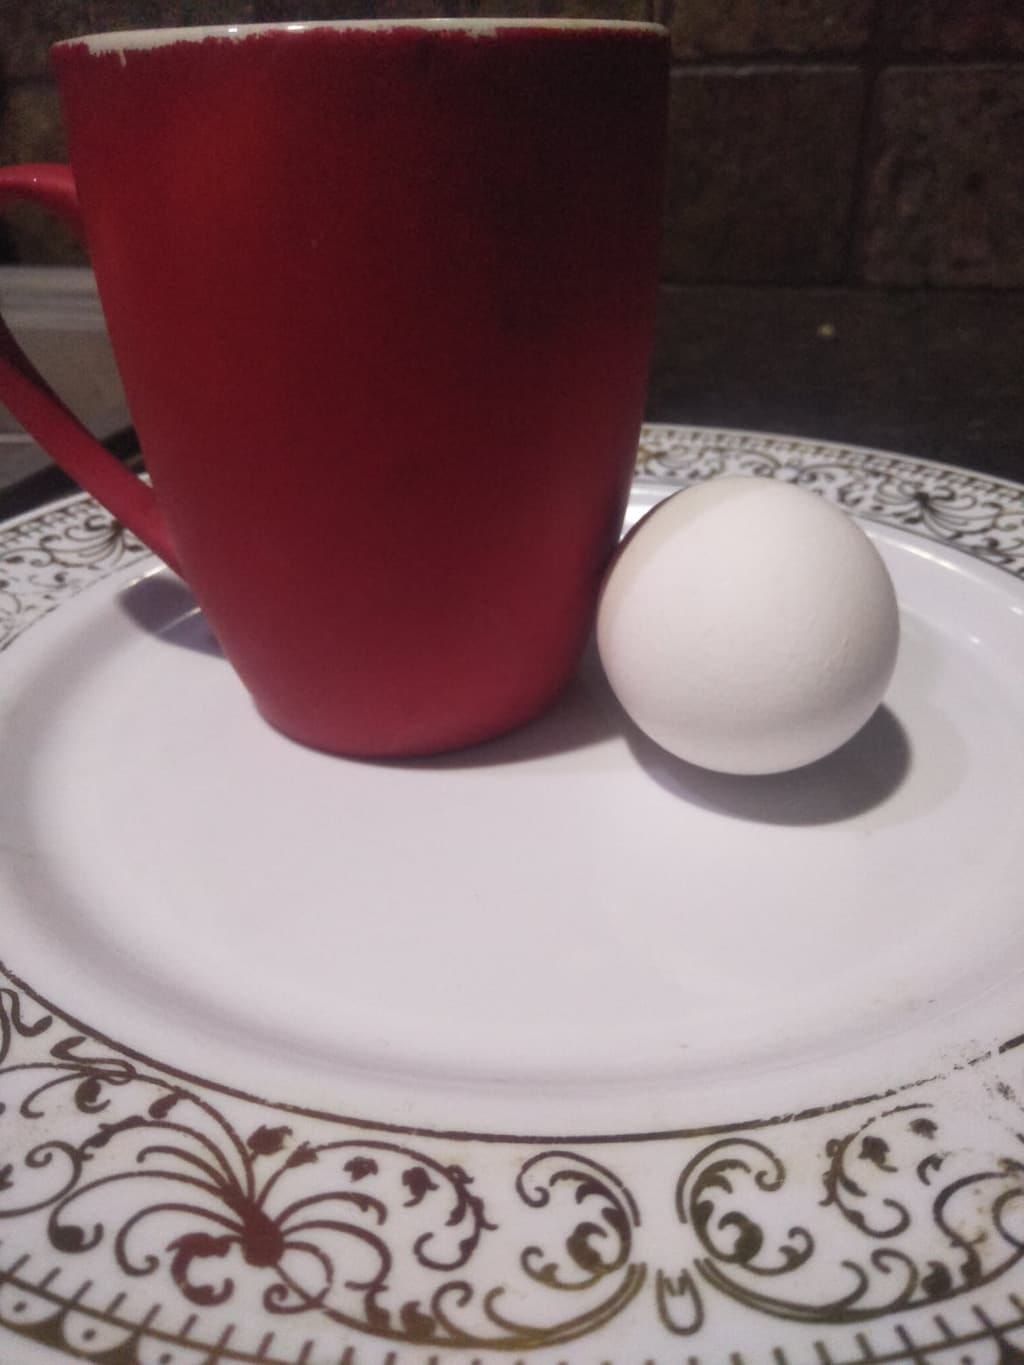 I made tea and boiled egg for my maid who was feeling cold.Her big smile made my day